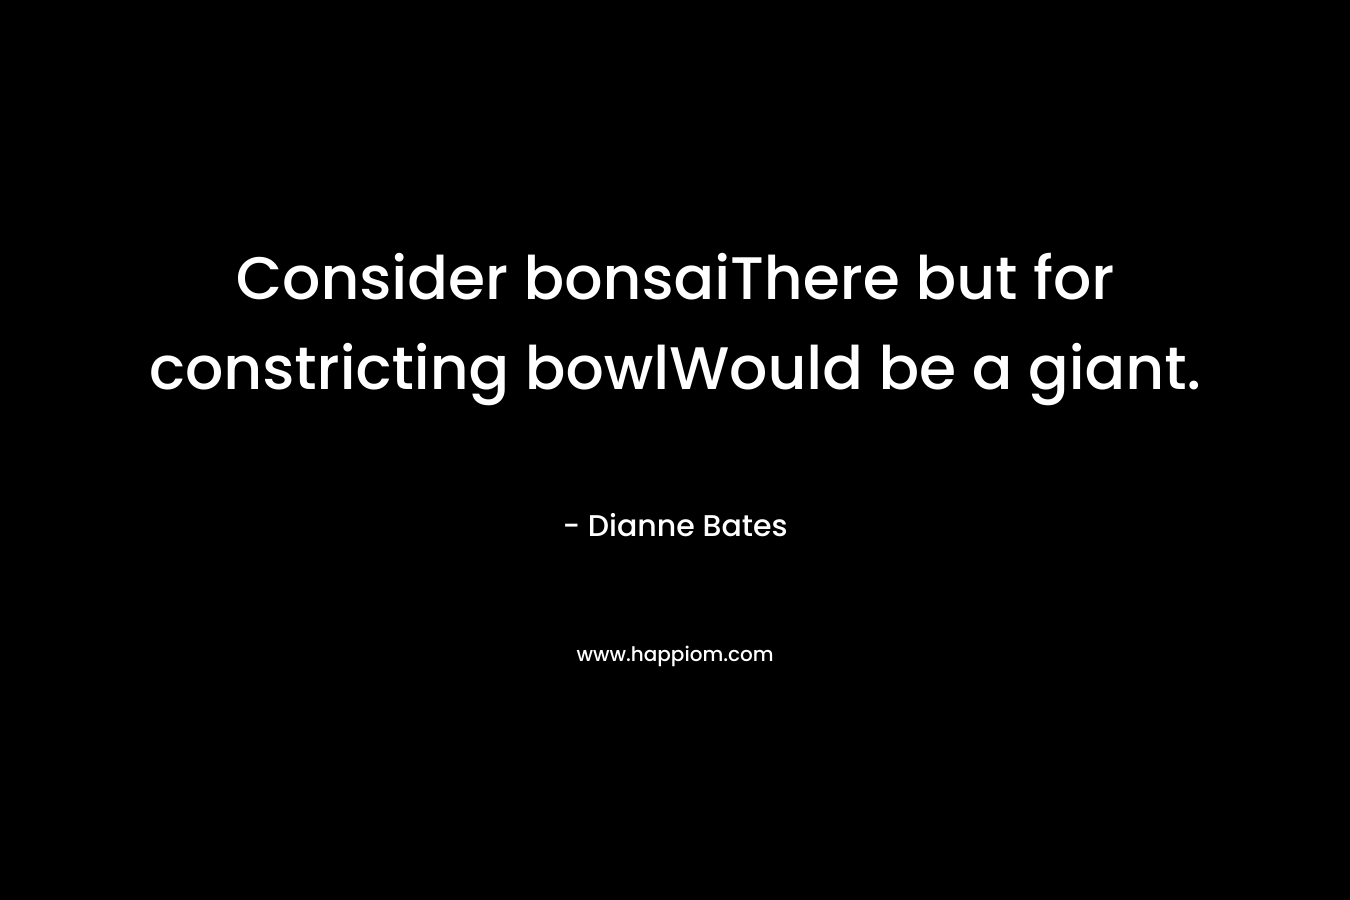 Consider bonsaiThere but for constricting bowlWould be a giant.